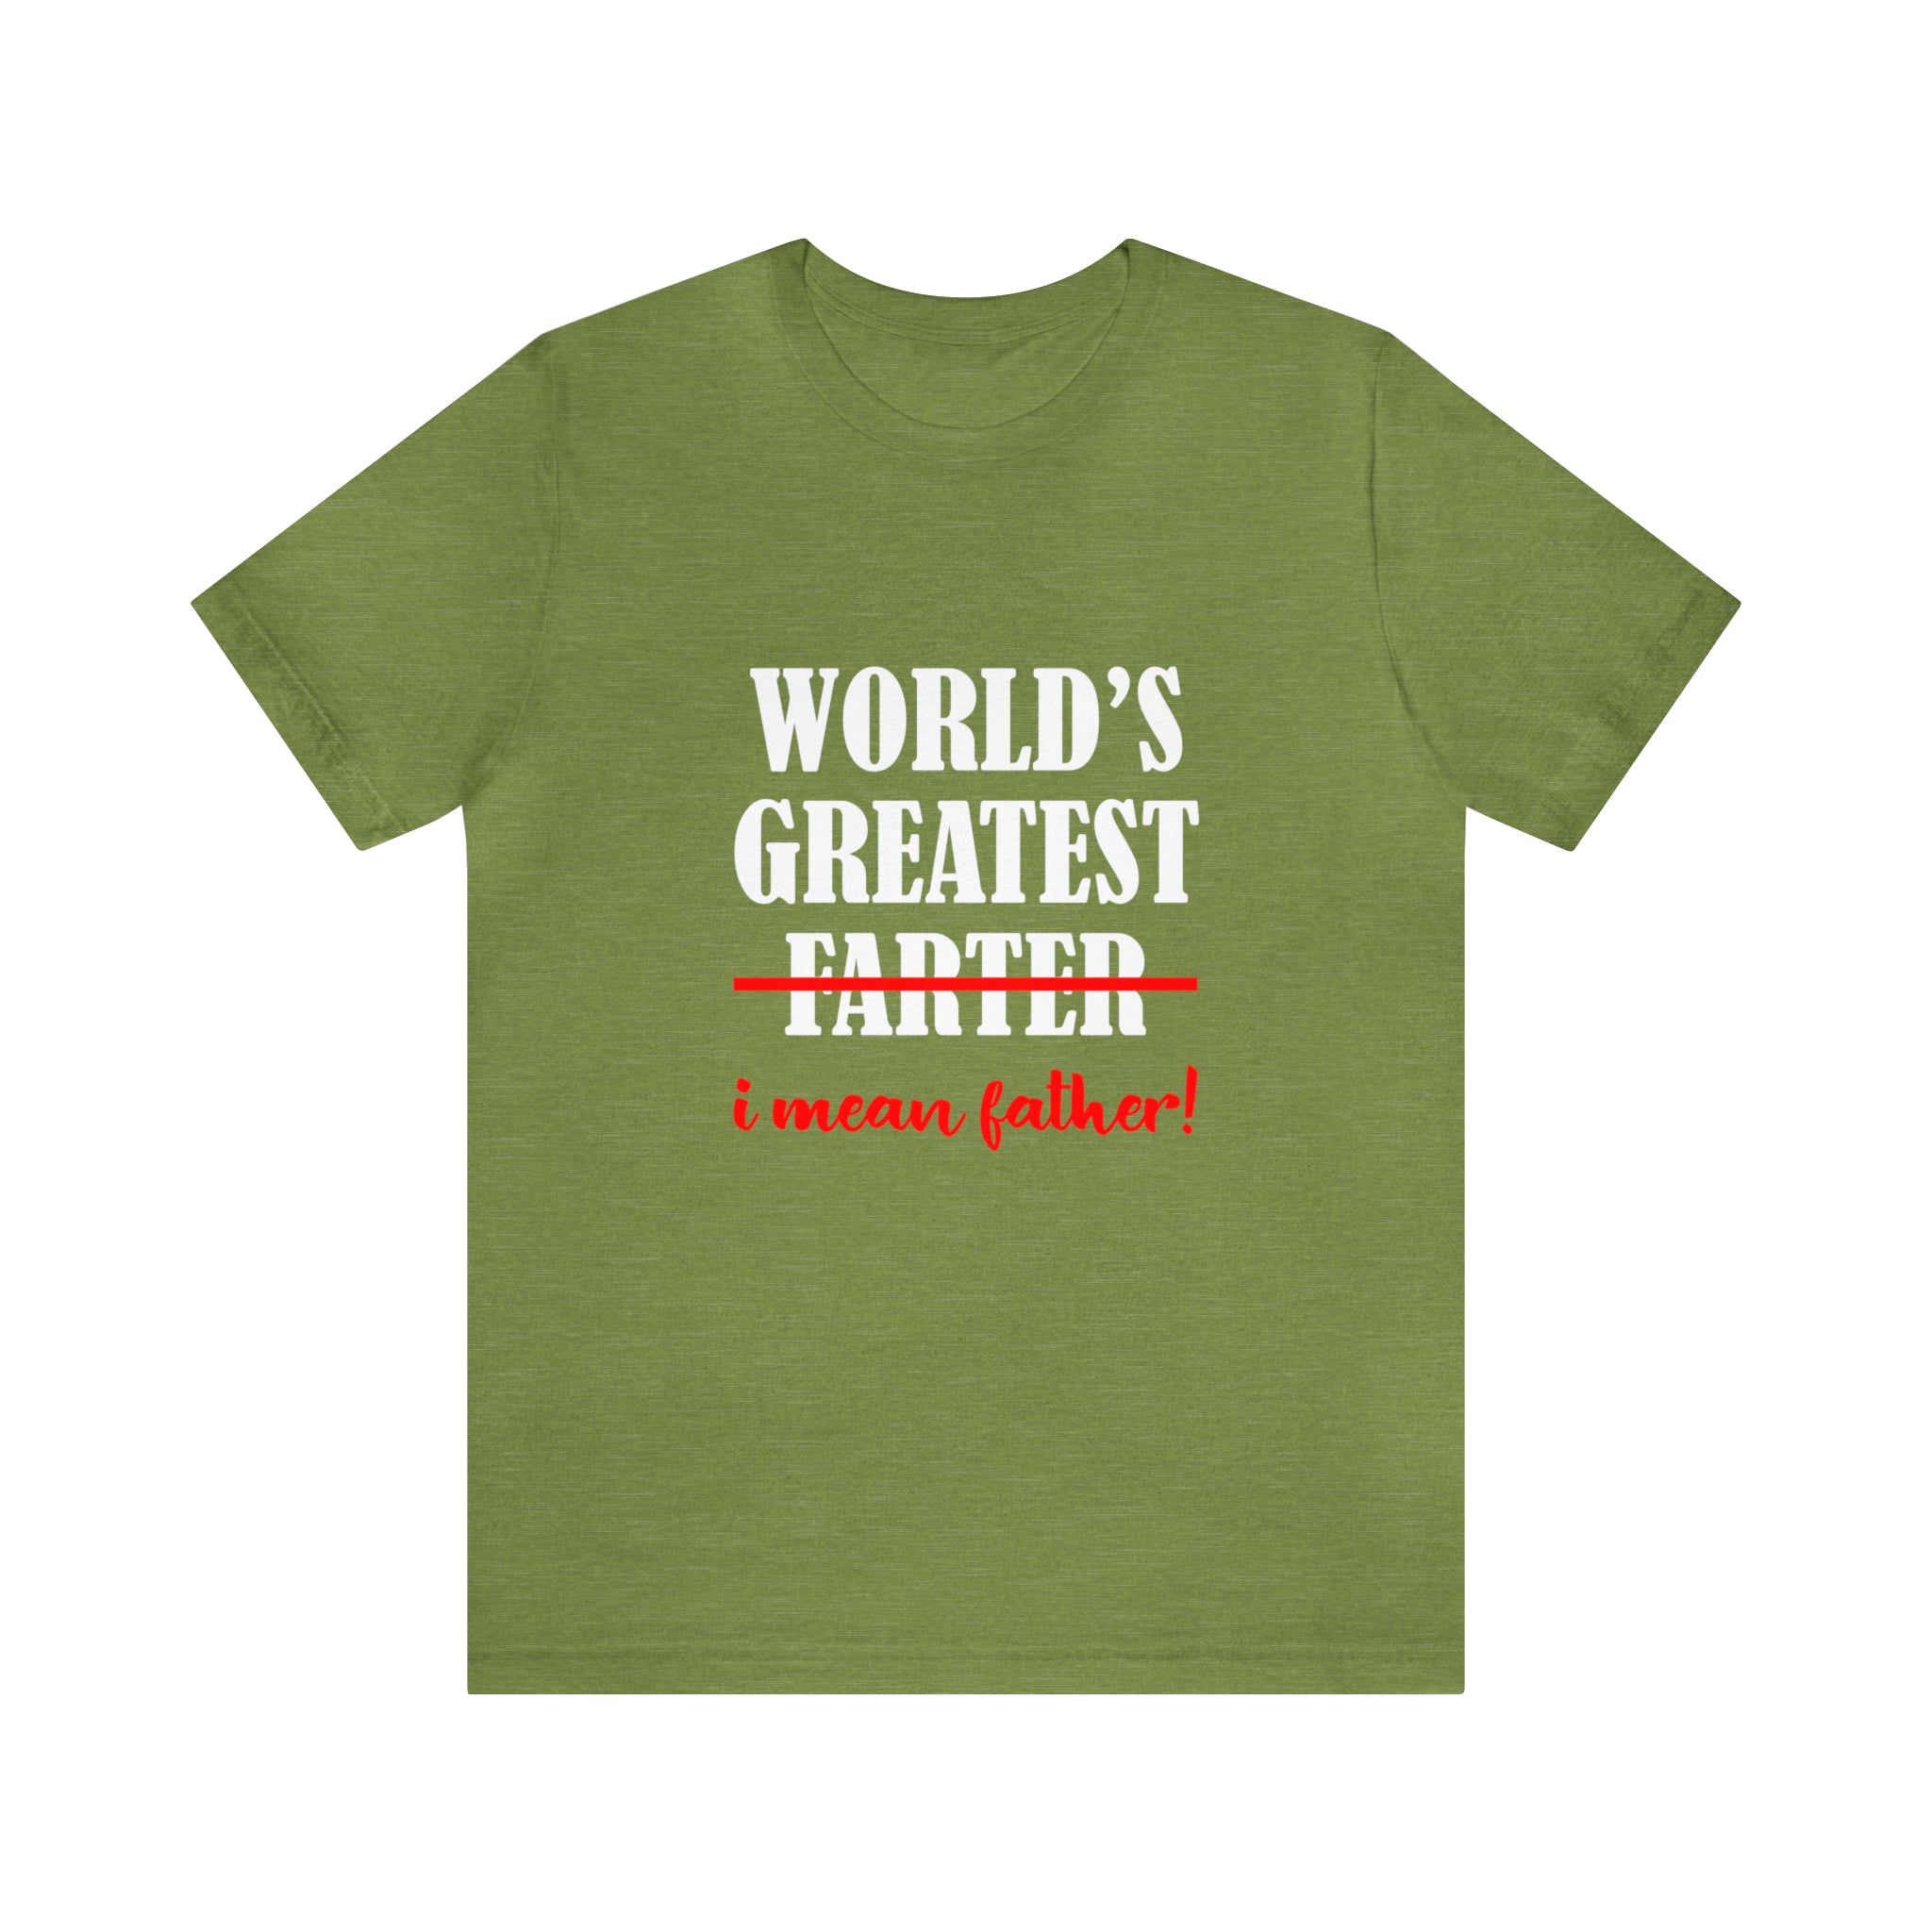 A humorous green Worlds Greatest Farter I mean Father T-Shirt that says "world's greatest teacher".